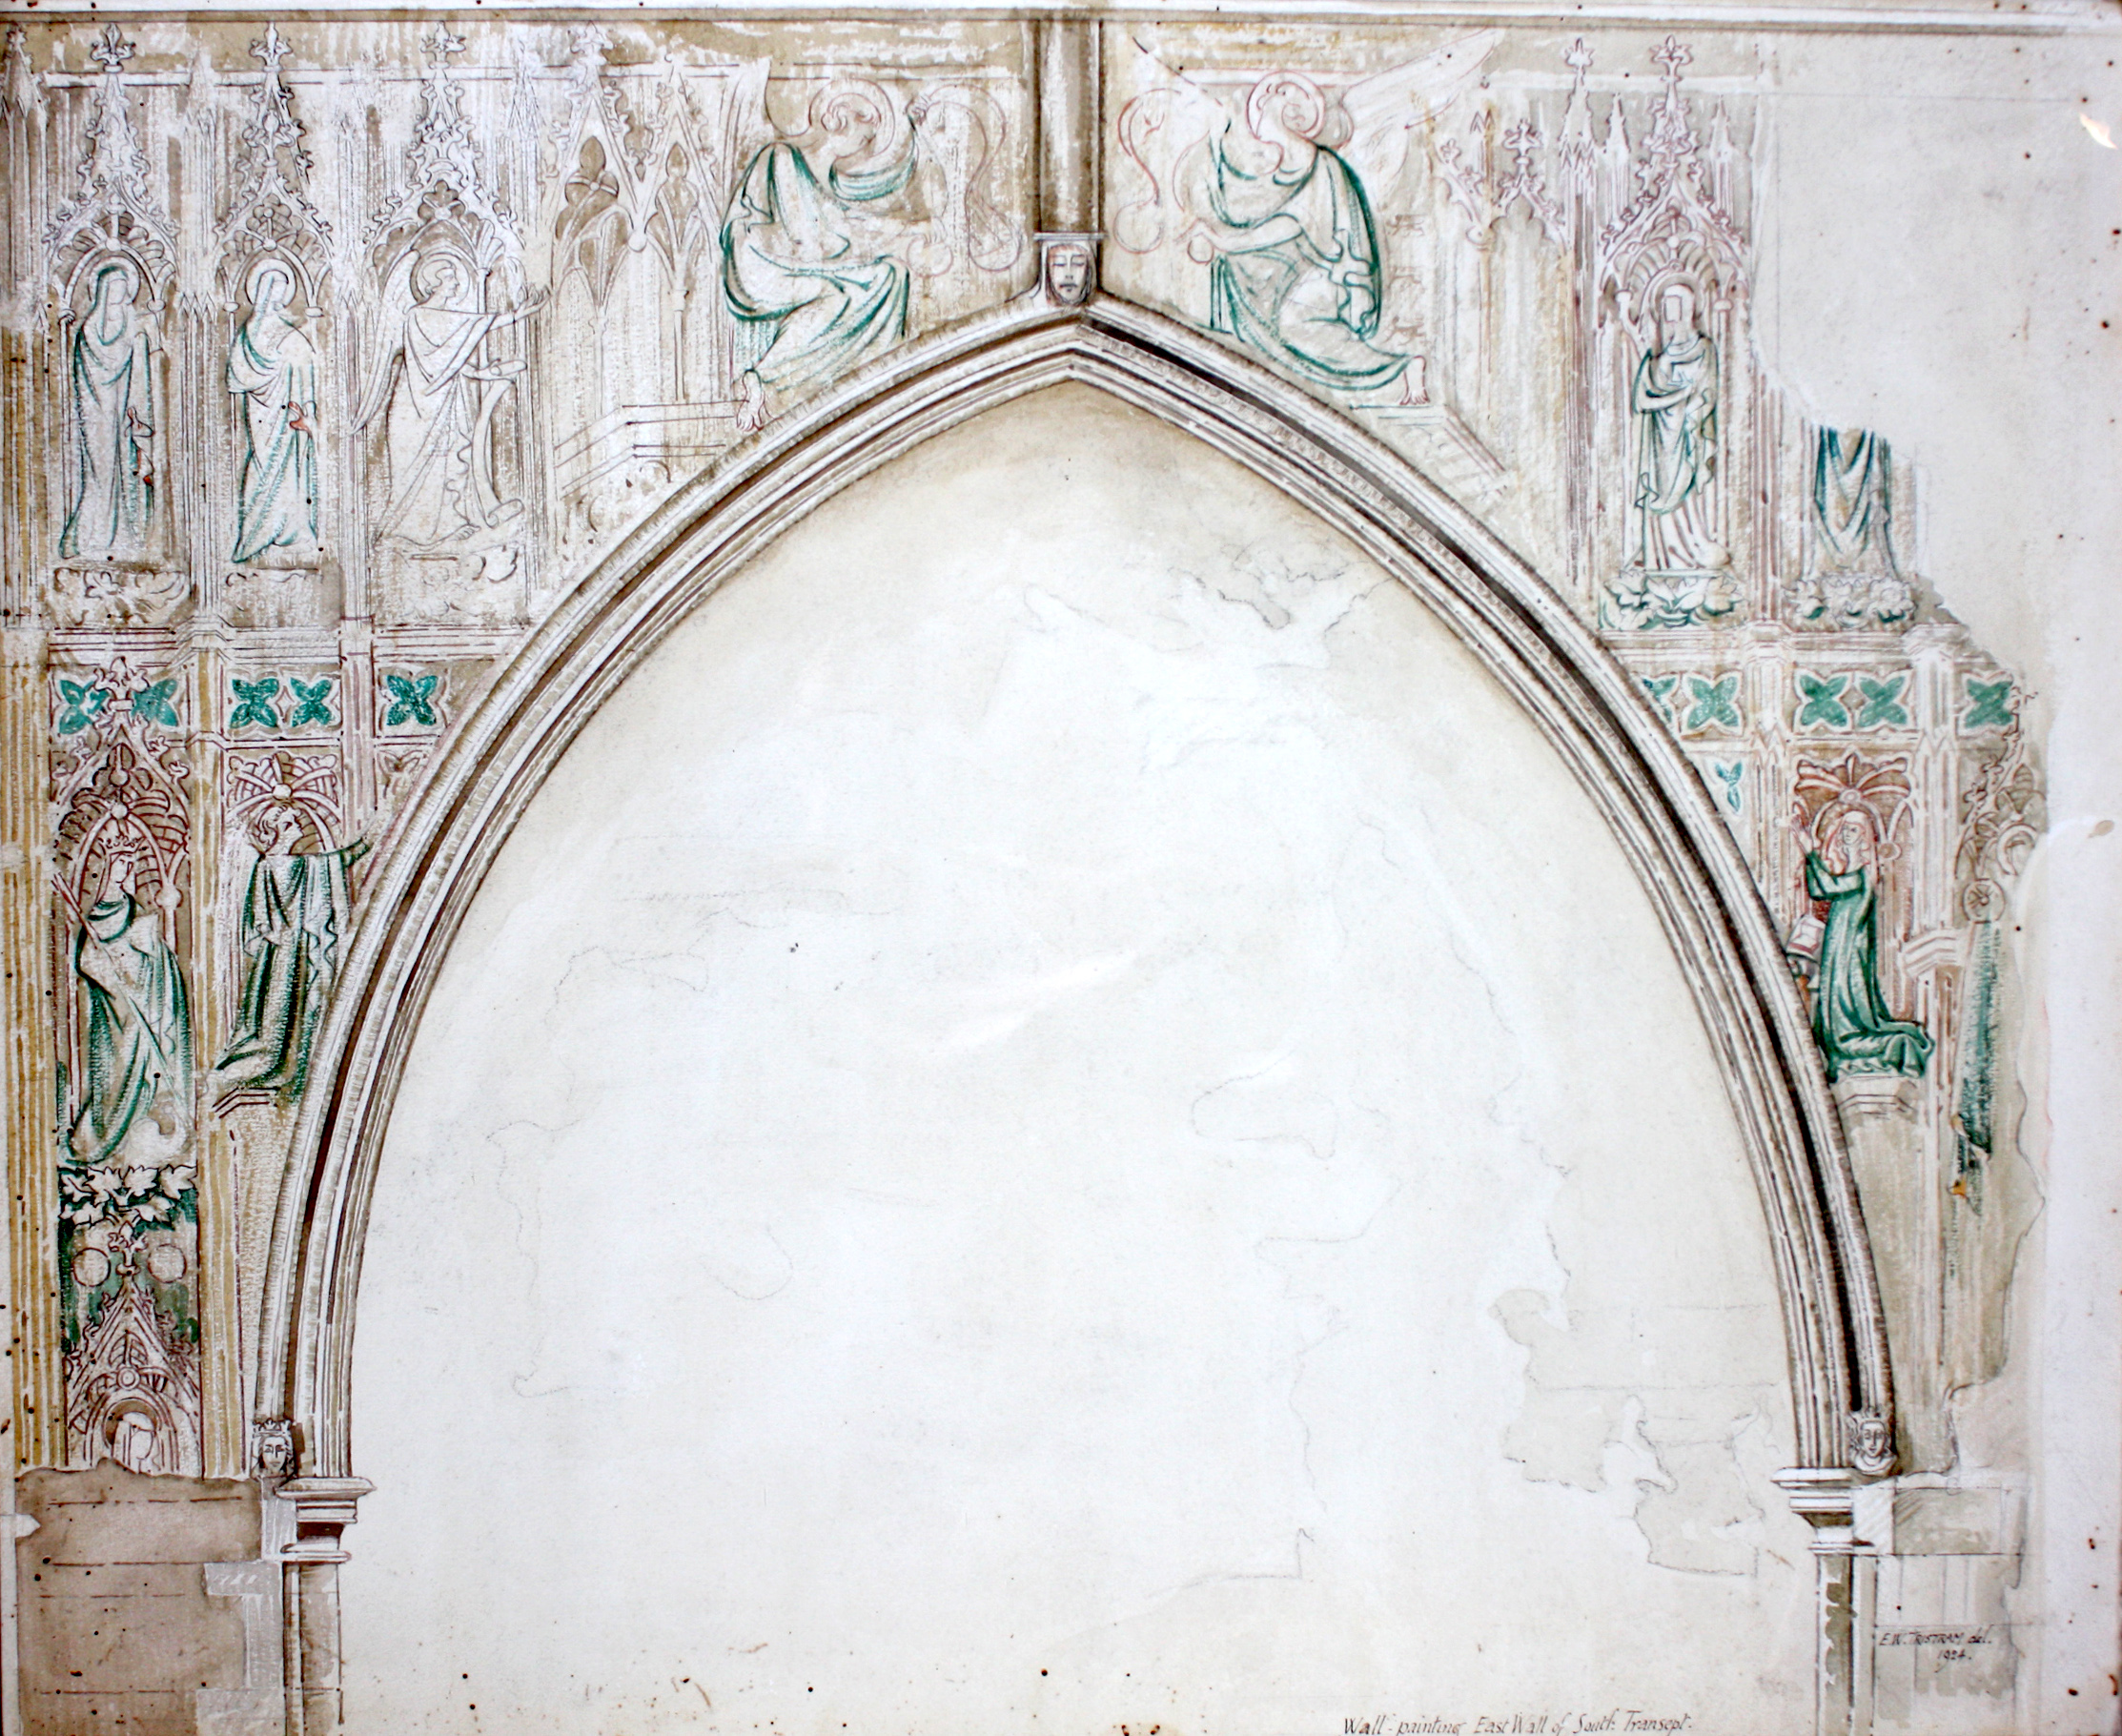 Earnest William Tristram's watercolour record of the remains of the mural over the Lady Chapel archway.